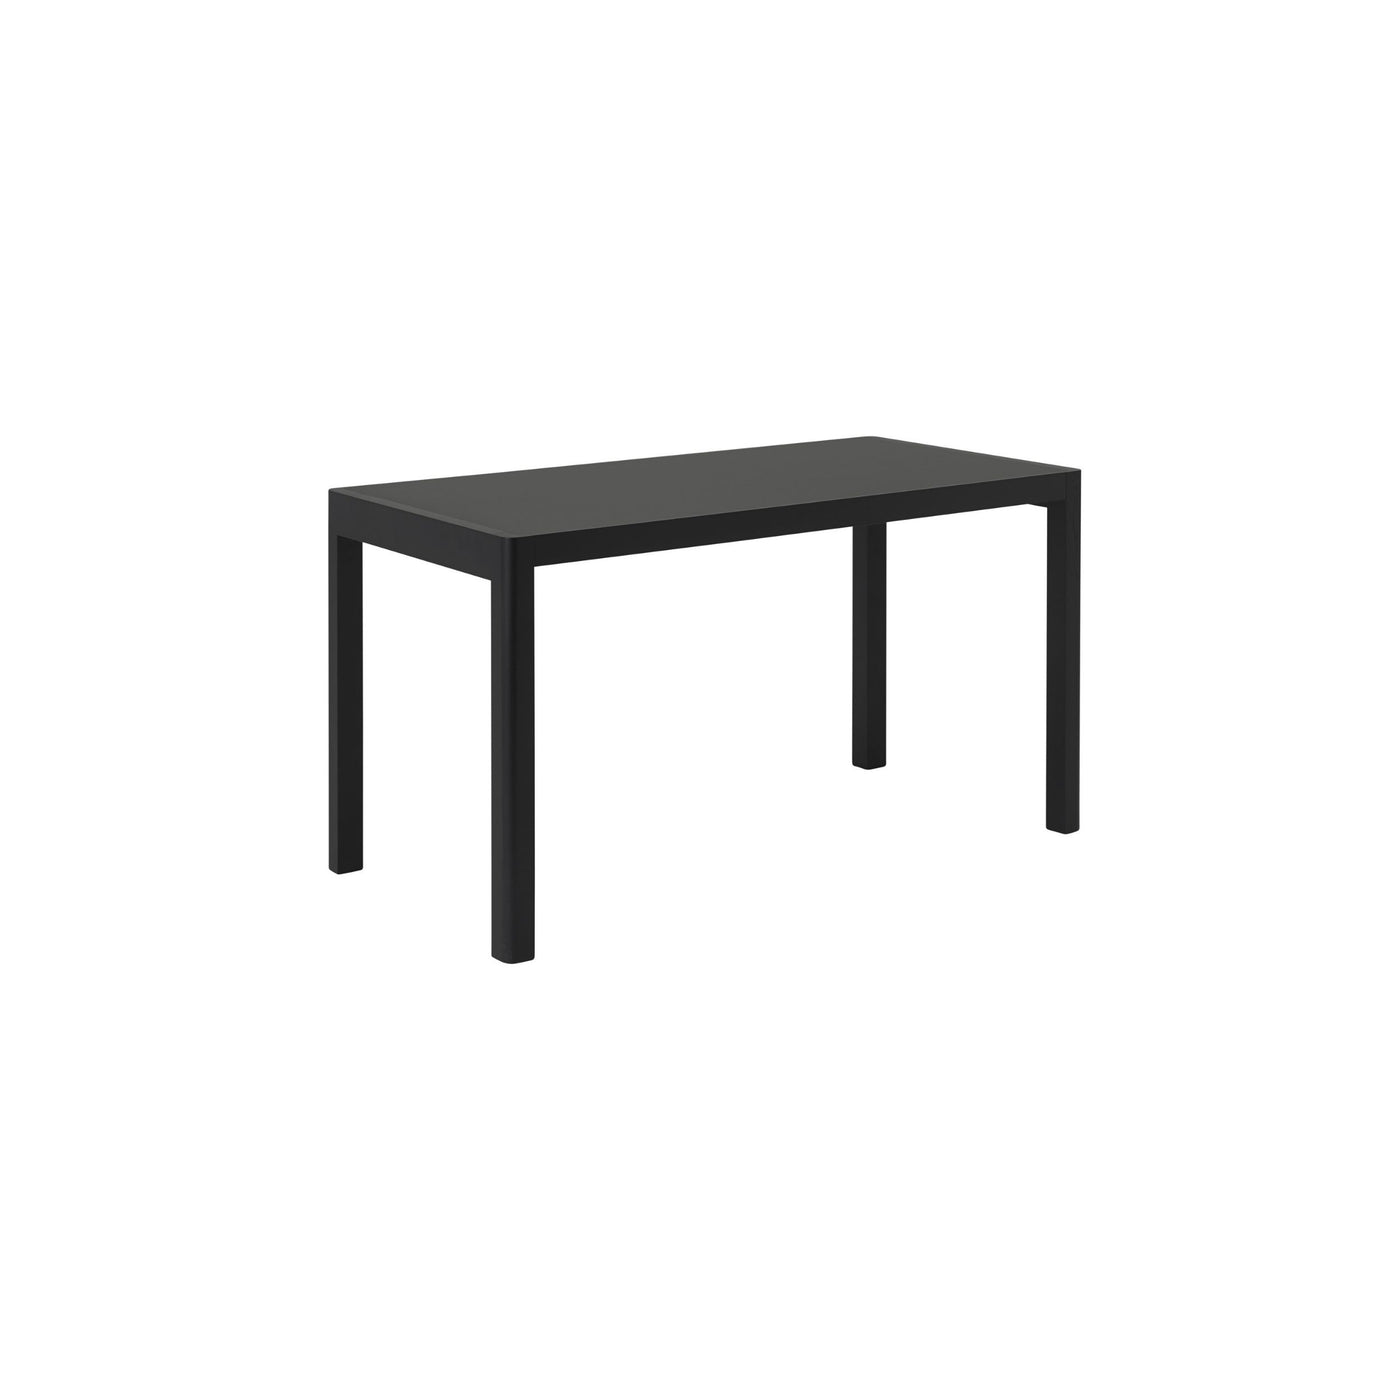 Muuto Workshop Table in black lino/black. Shop online at someday designs. #size_65x130